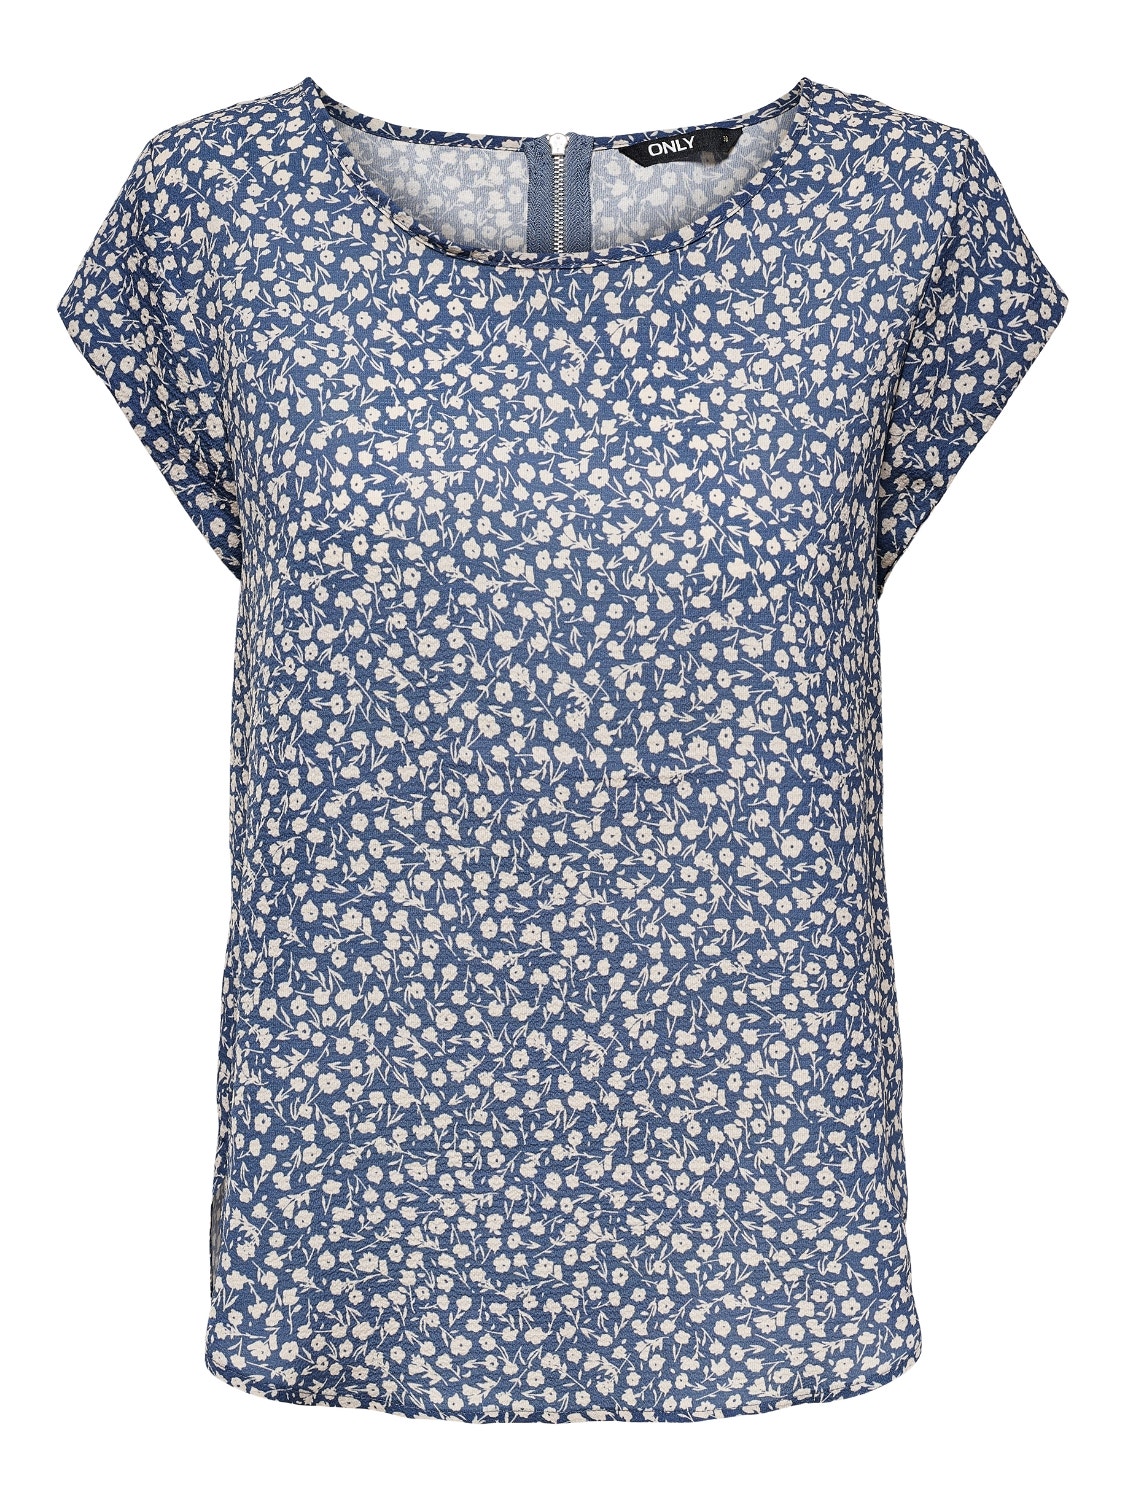 ONLY Printed Short Sleeved Top -Blue Mirage - 15161116